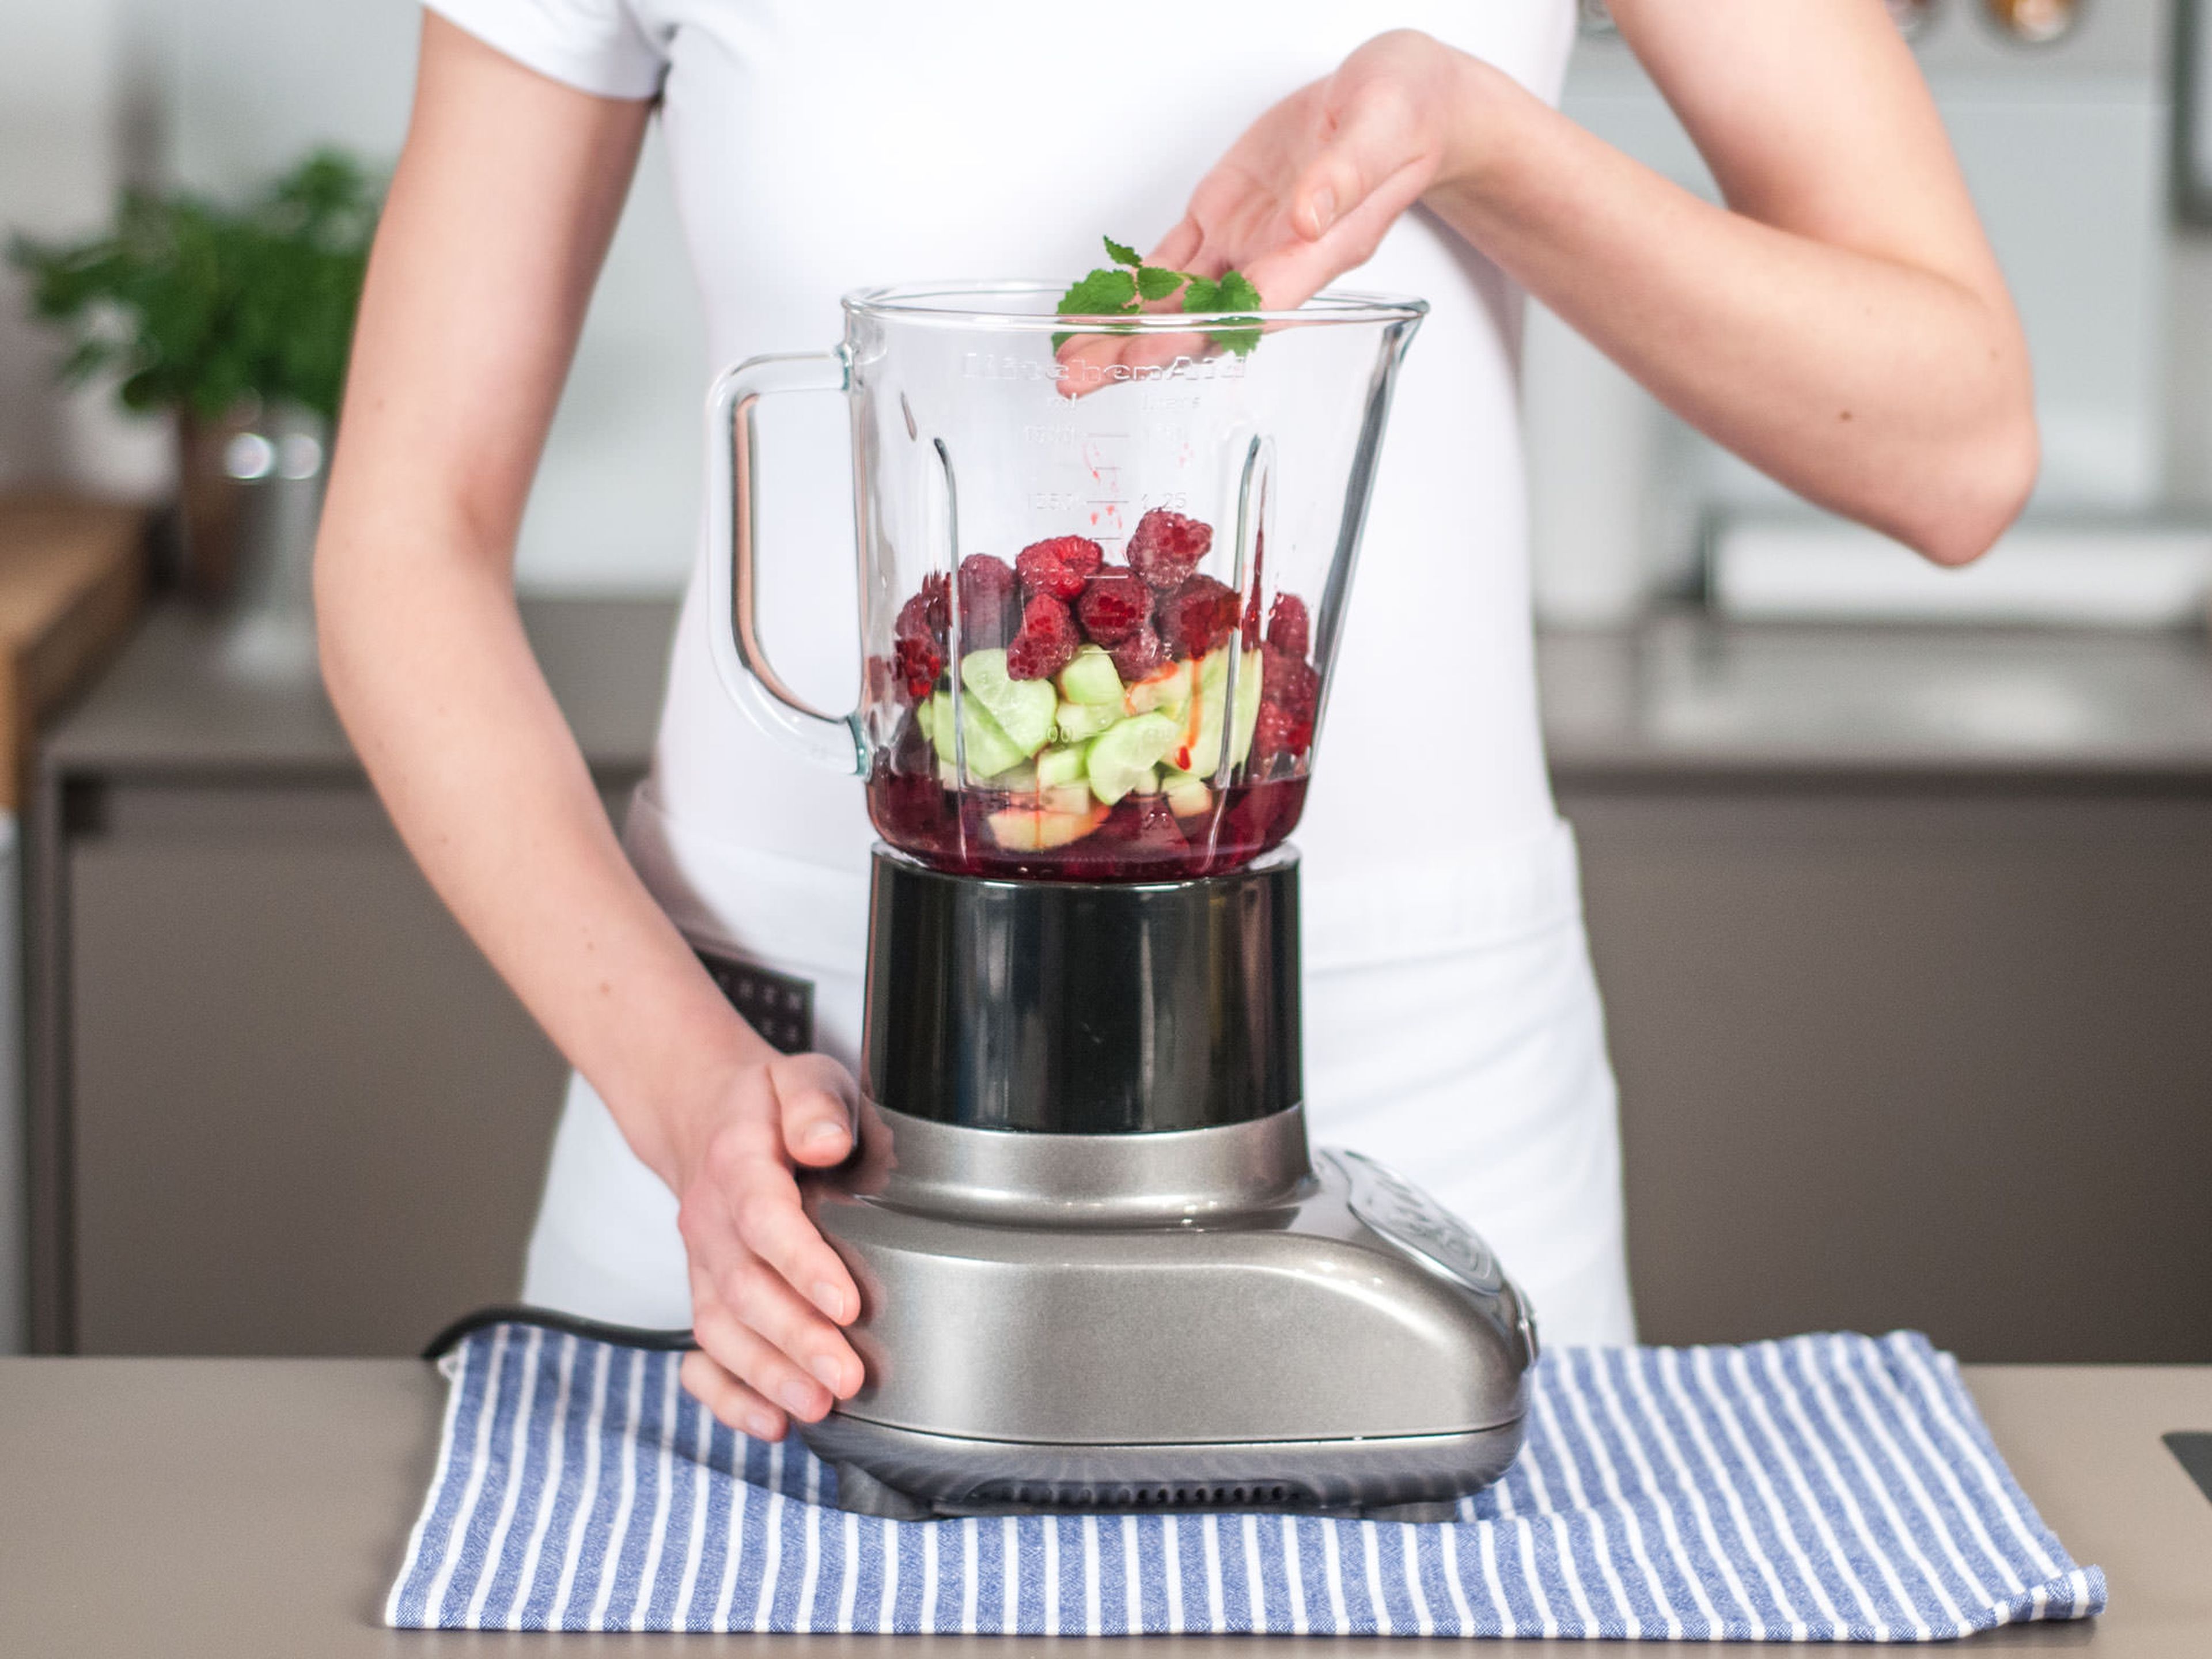 Place cucumber, red beets, frozen raspberries, agave syrup, and water into blender. Pick mint leaves and add to blender.